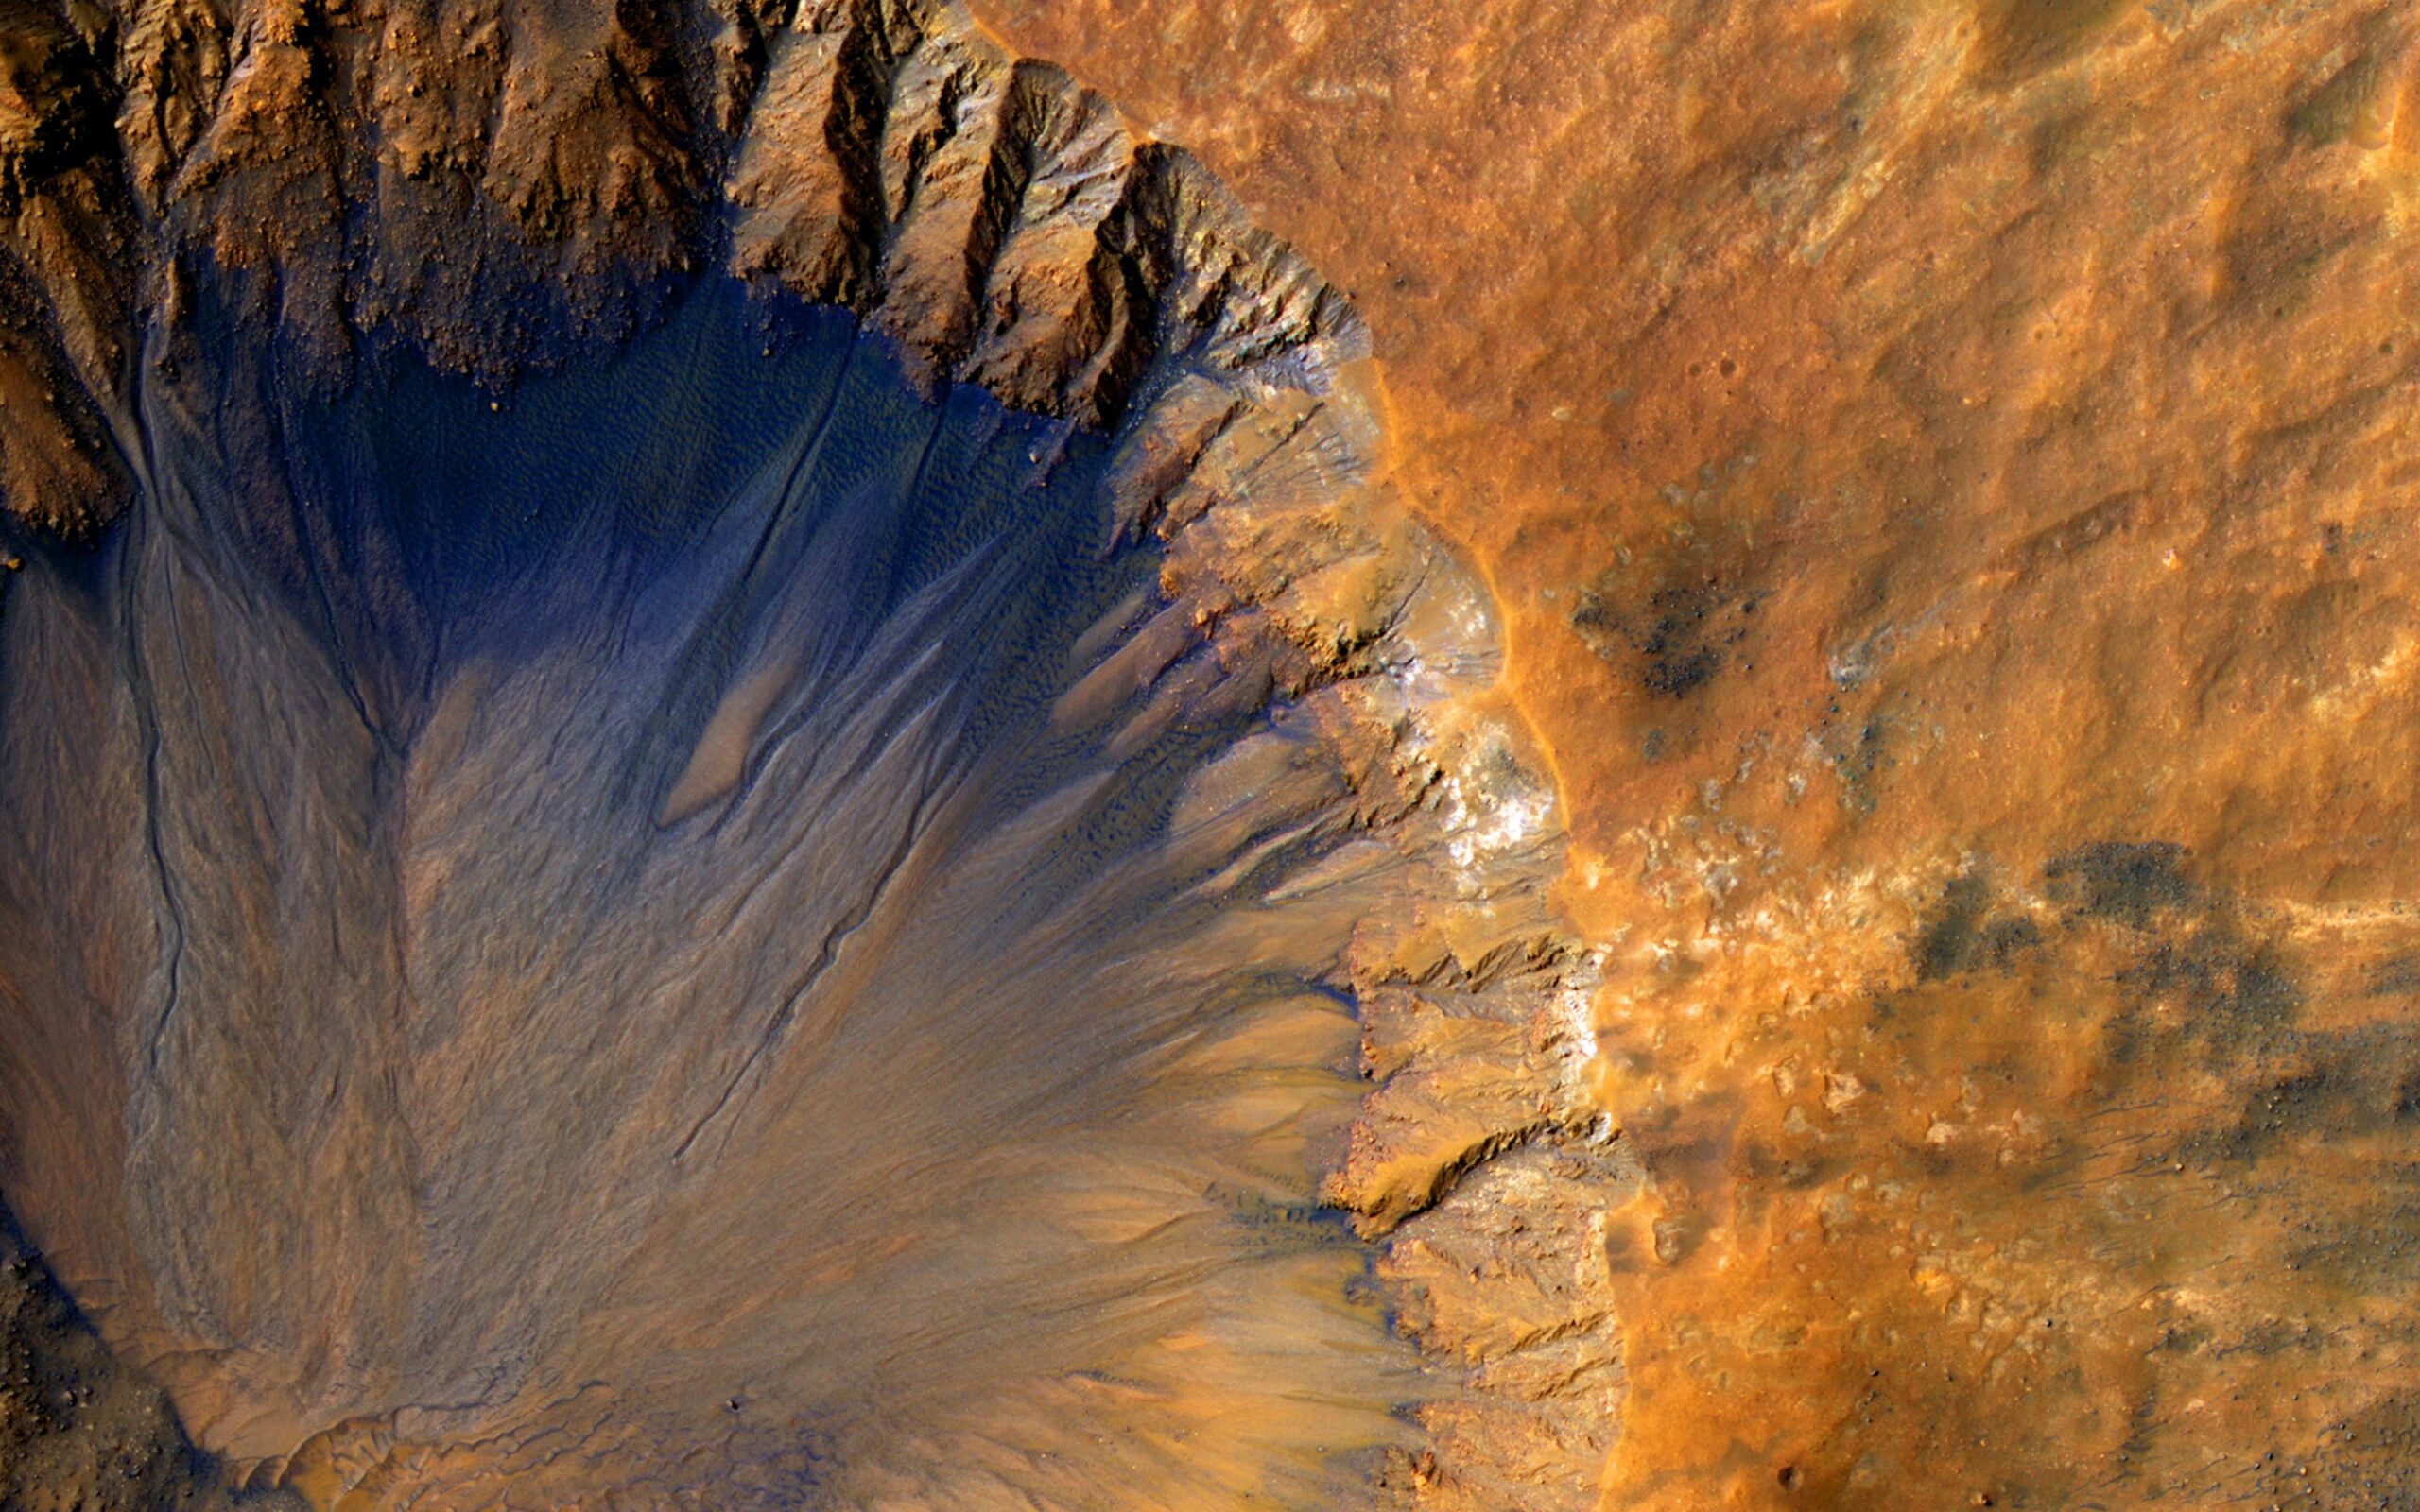 A satellite photo of the Sirenum Fossae, a large trough on the surface of Mars.